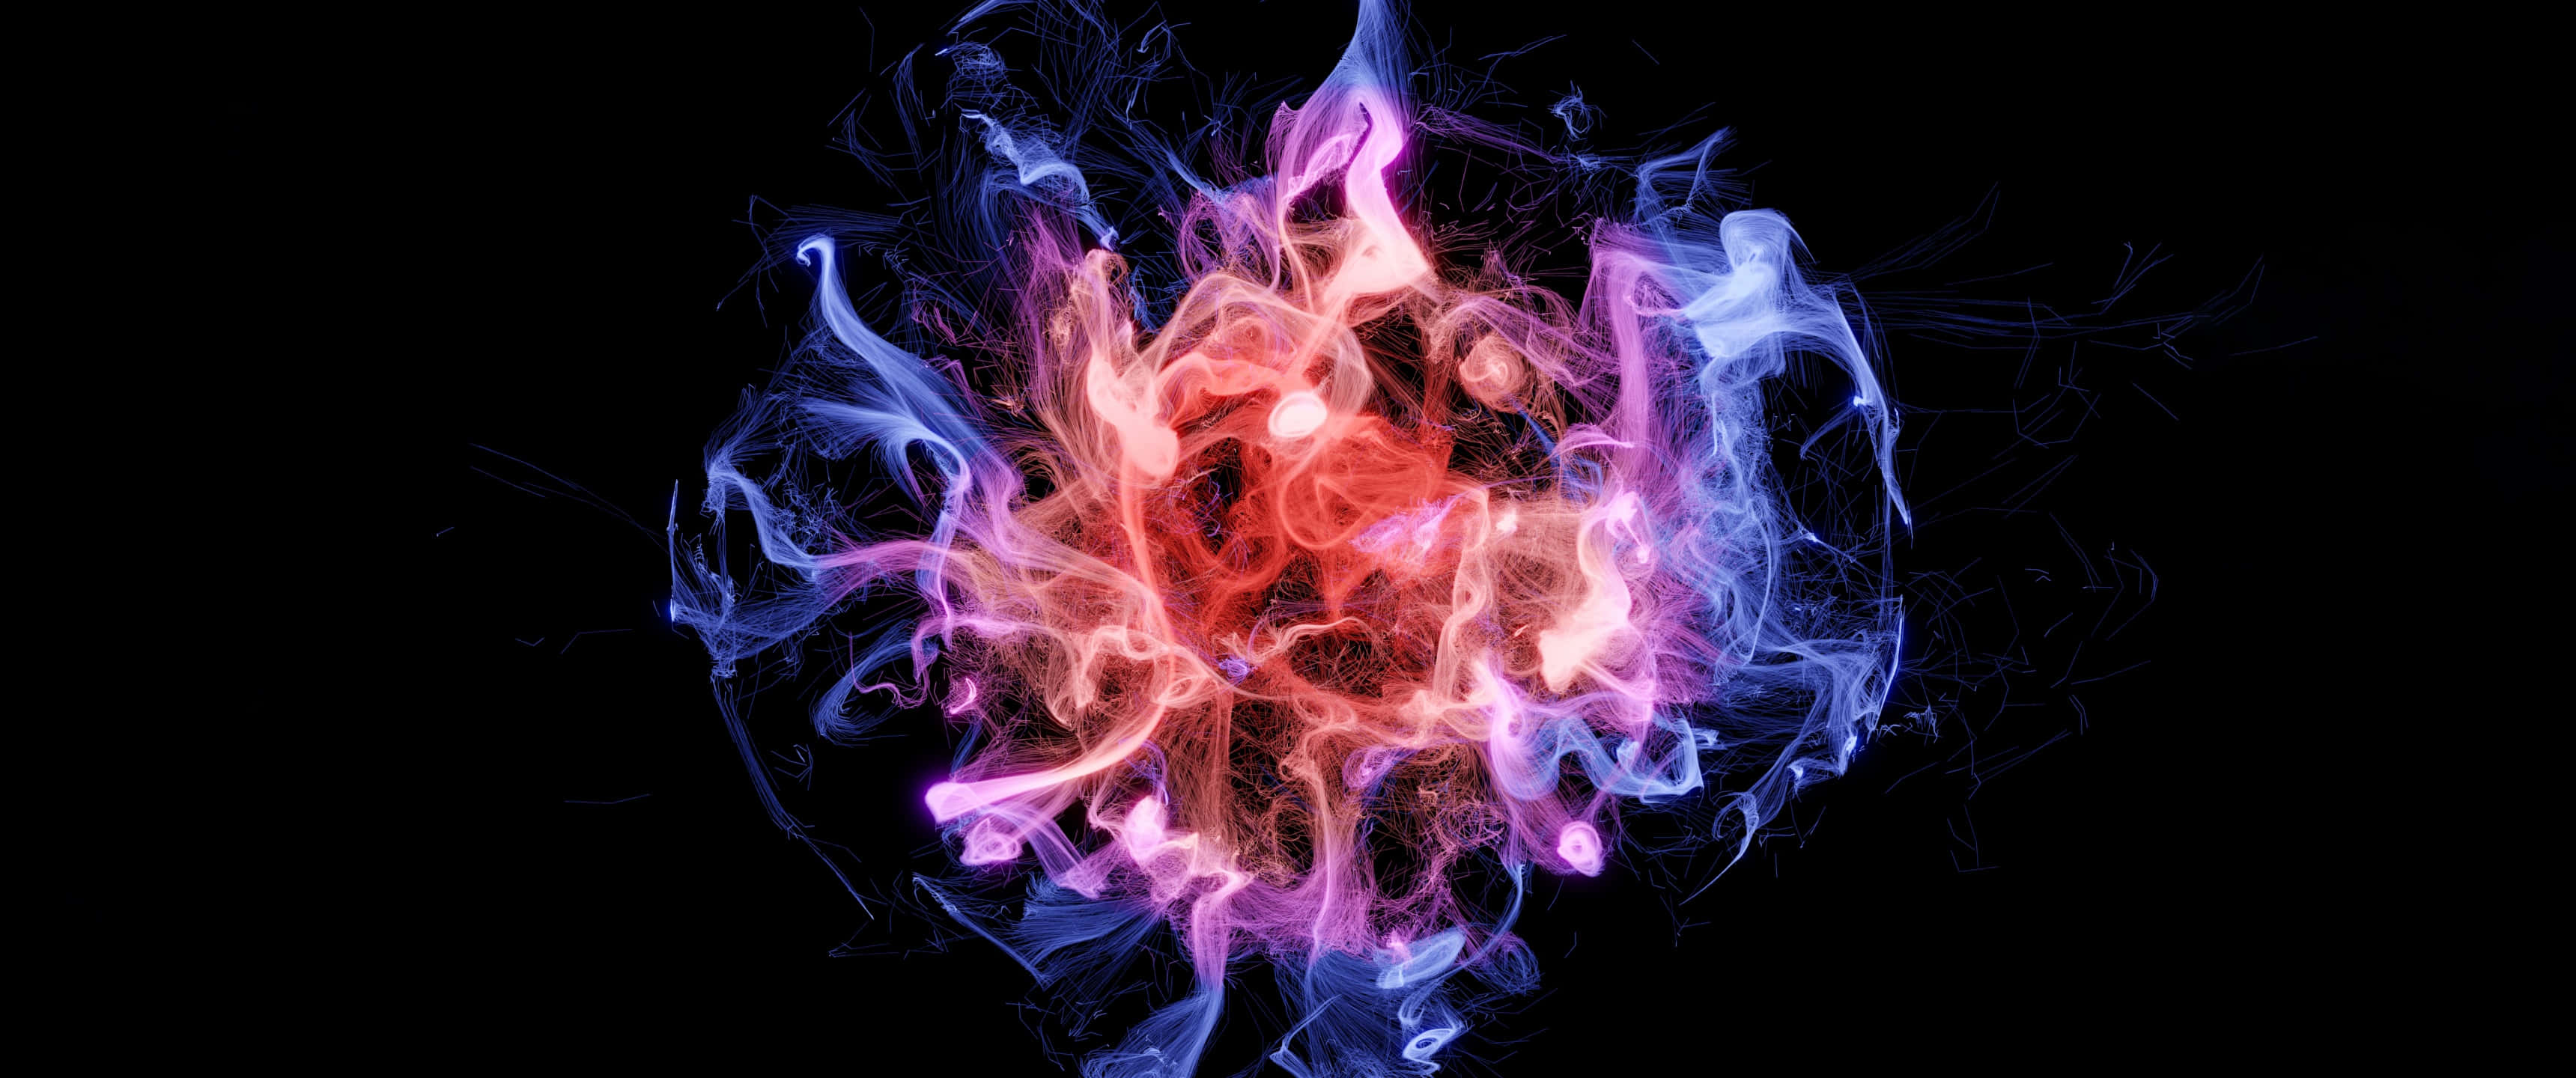 Burning Red and Blue Flames Wallpaper